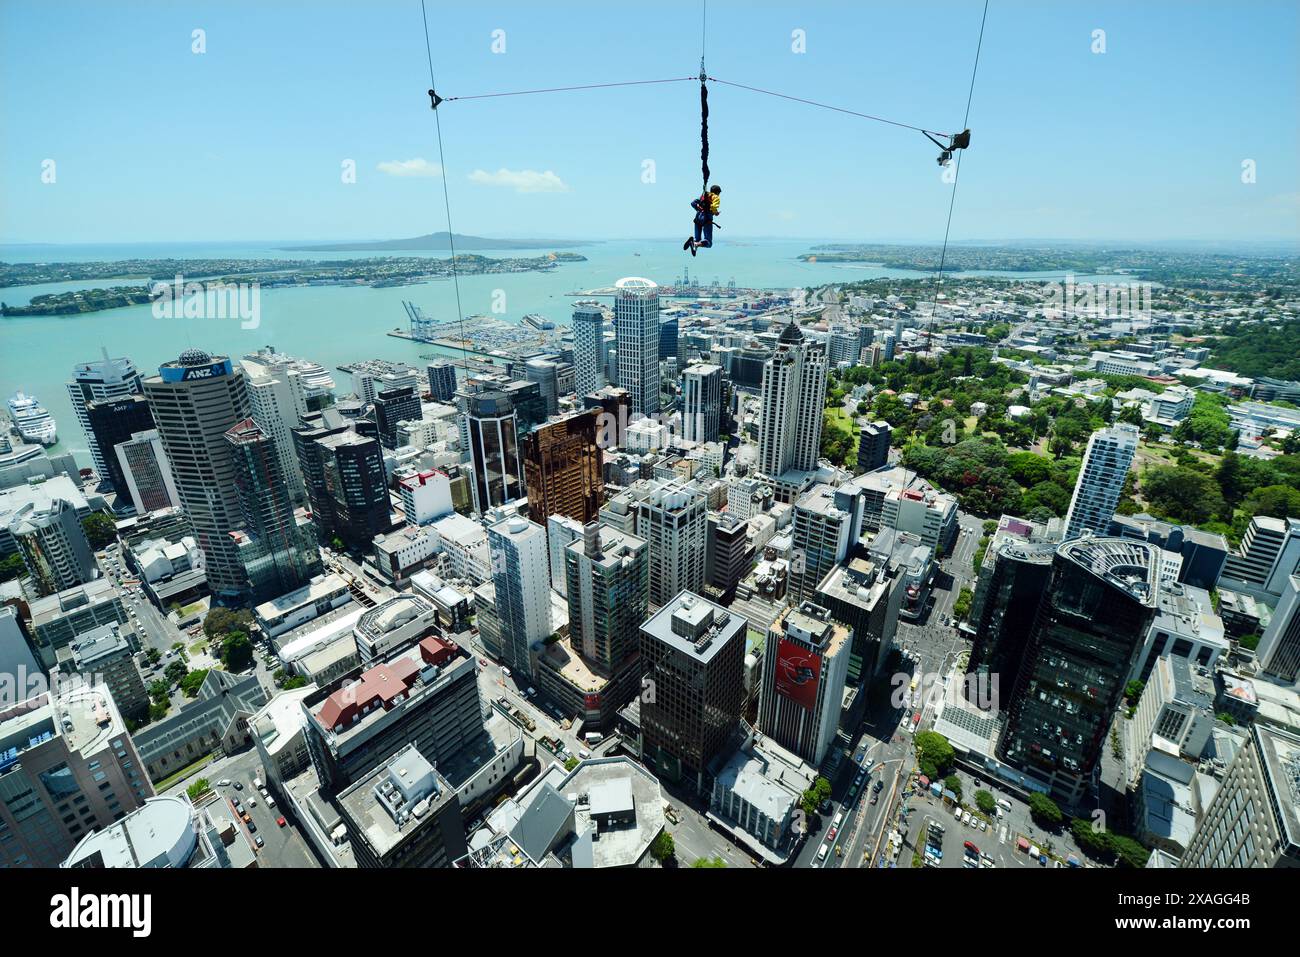 Bungy jumping from the Sky tower in Auckland, New Zealand. Stock Photo